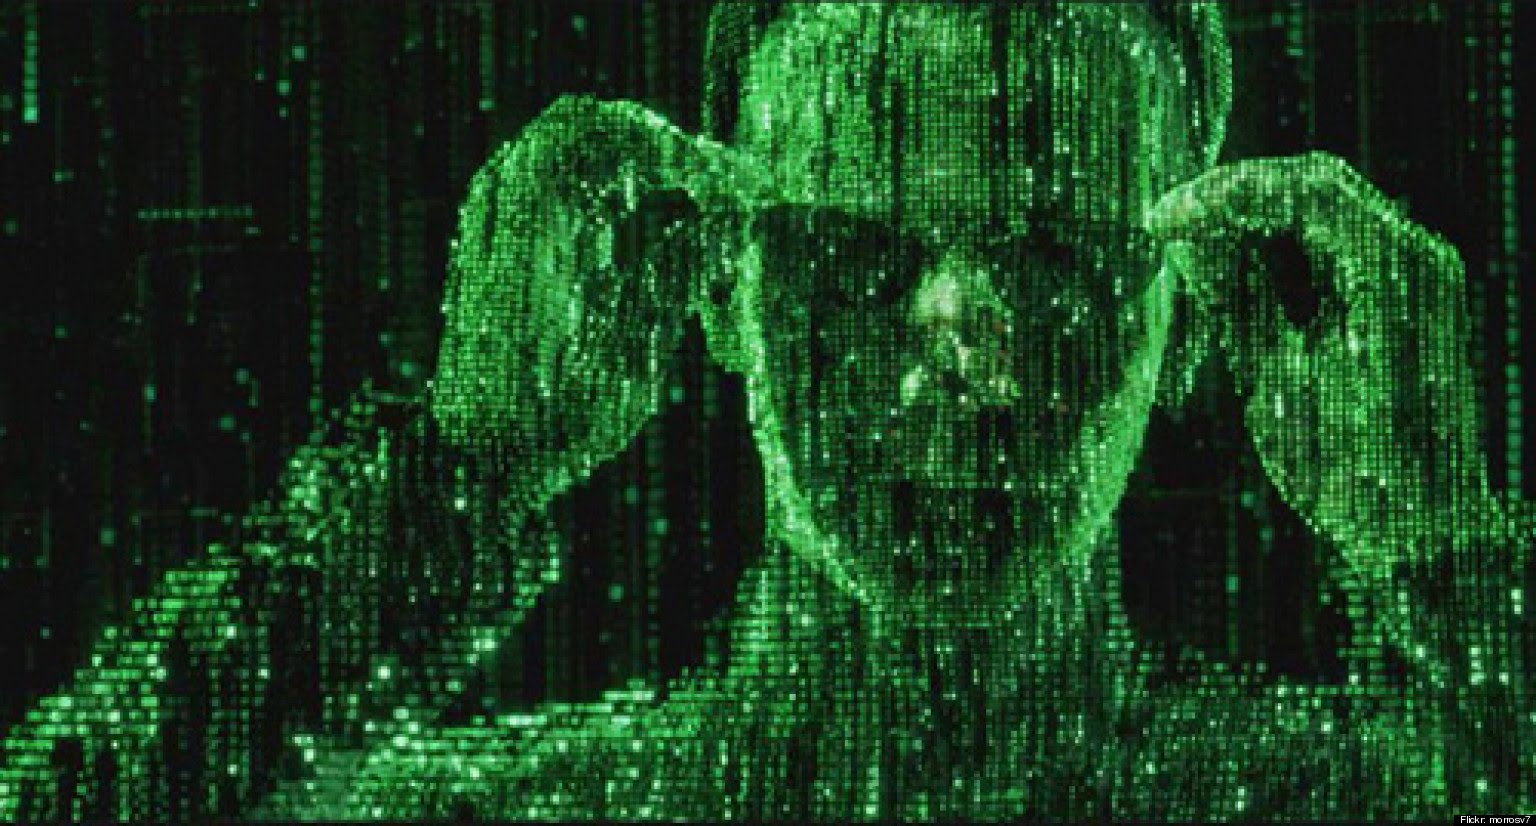 I can see the code in the Matrix